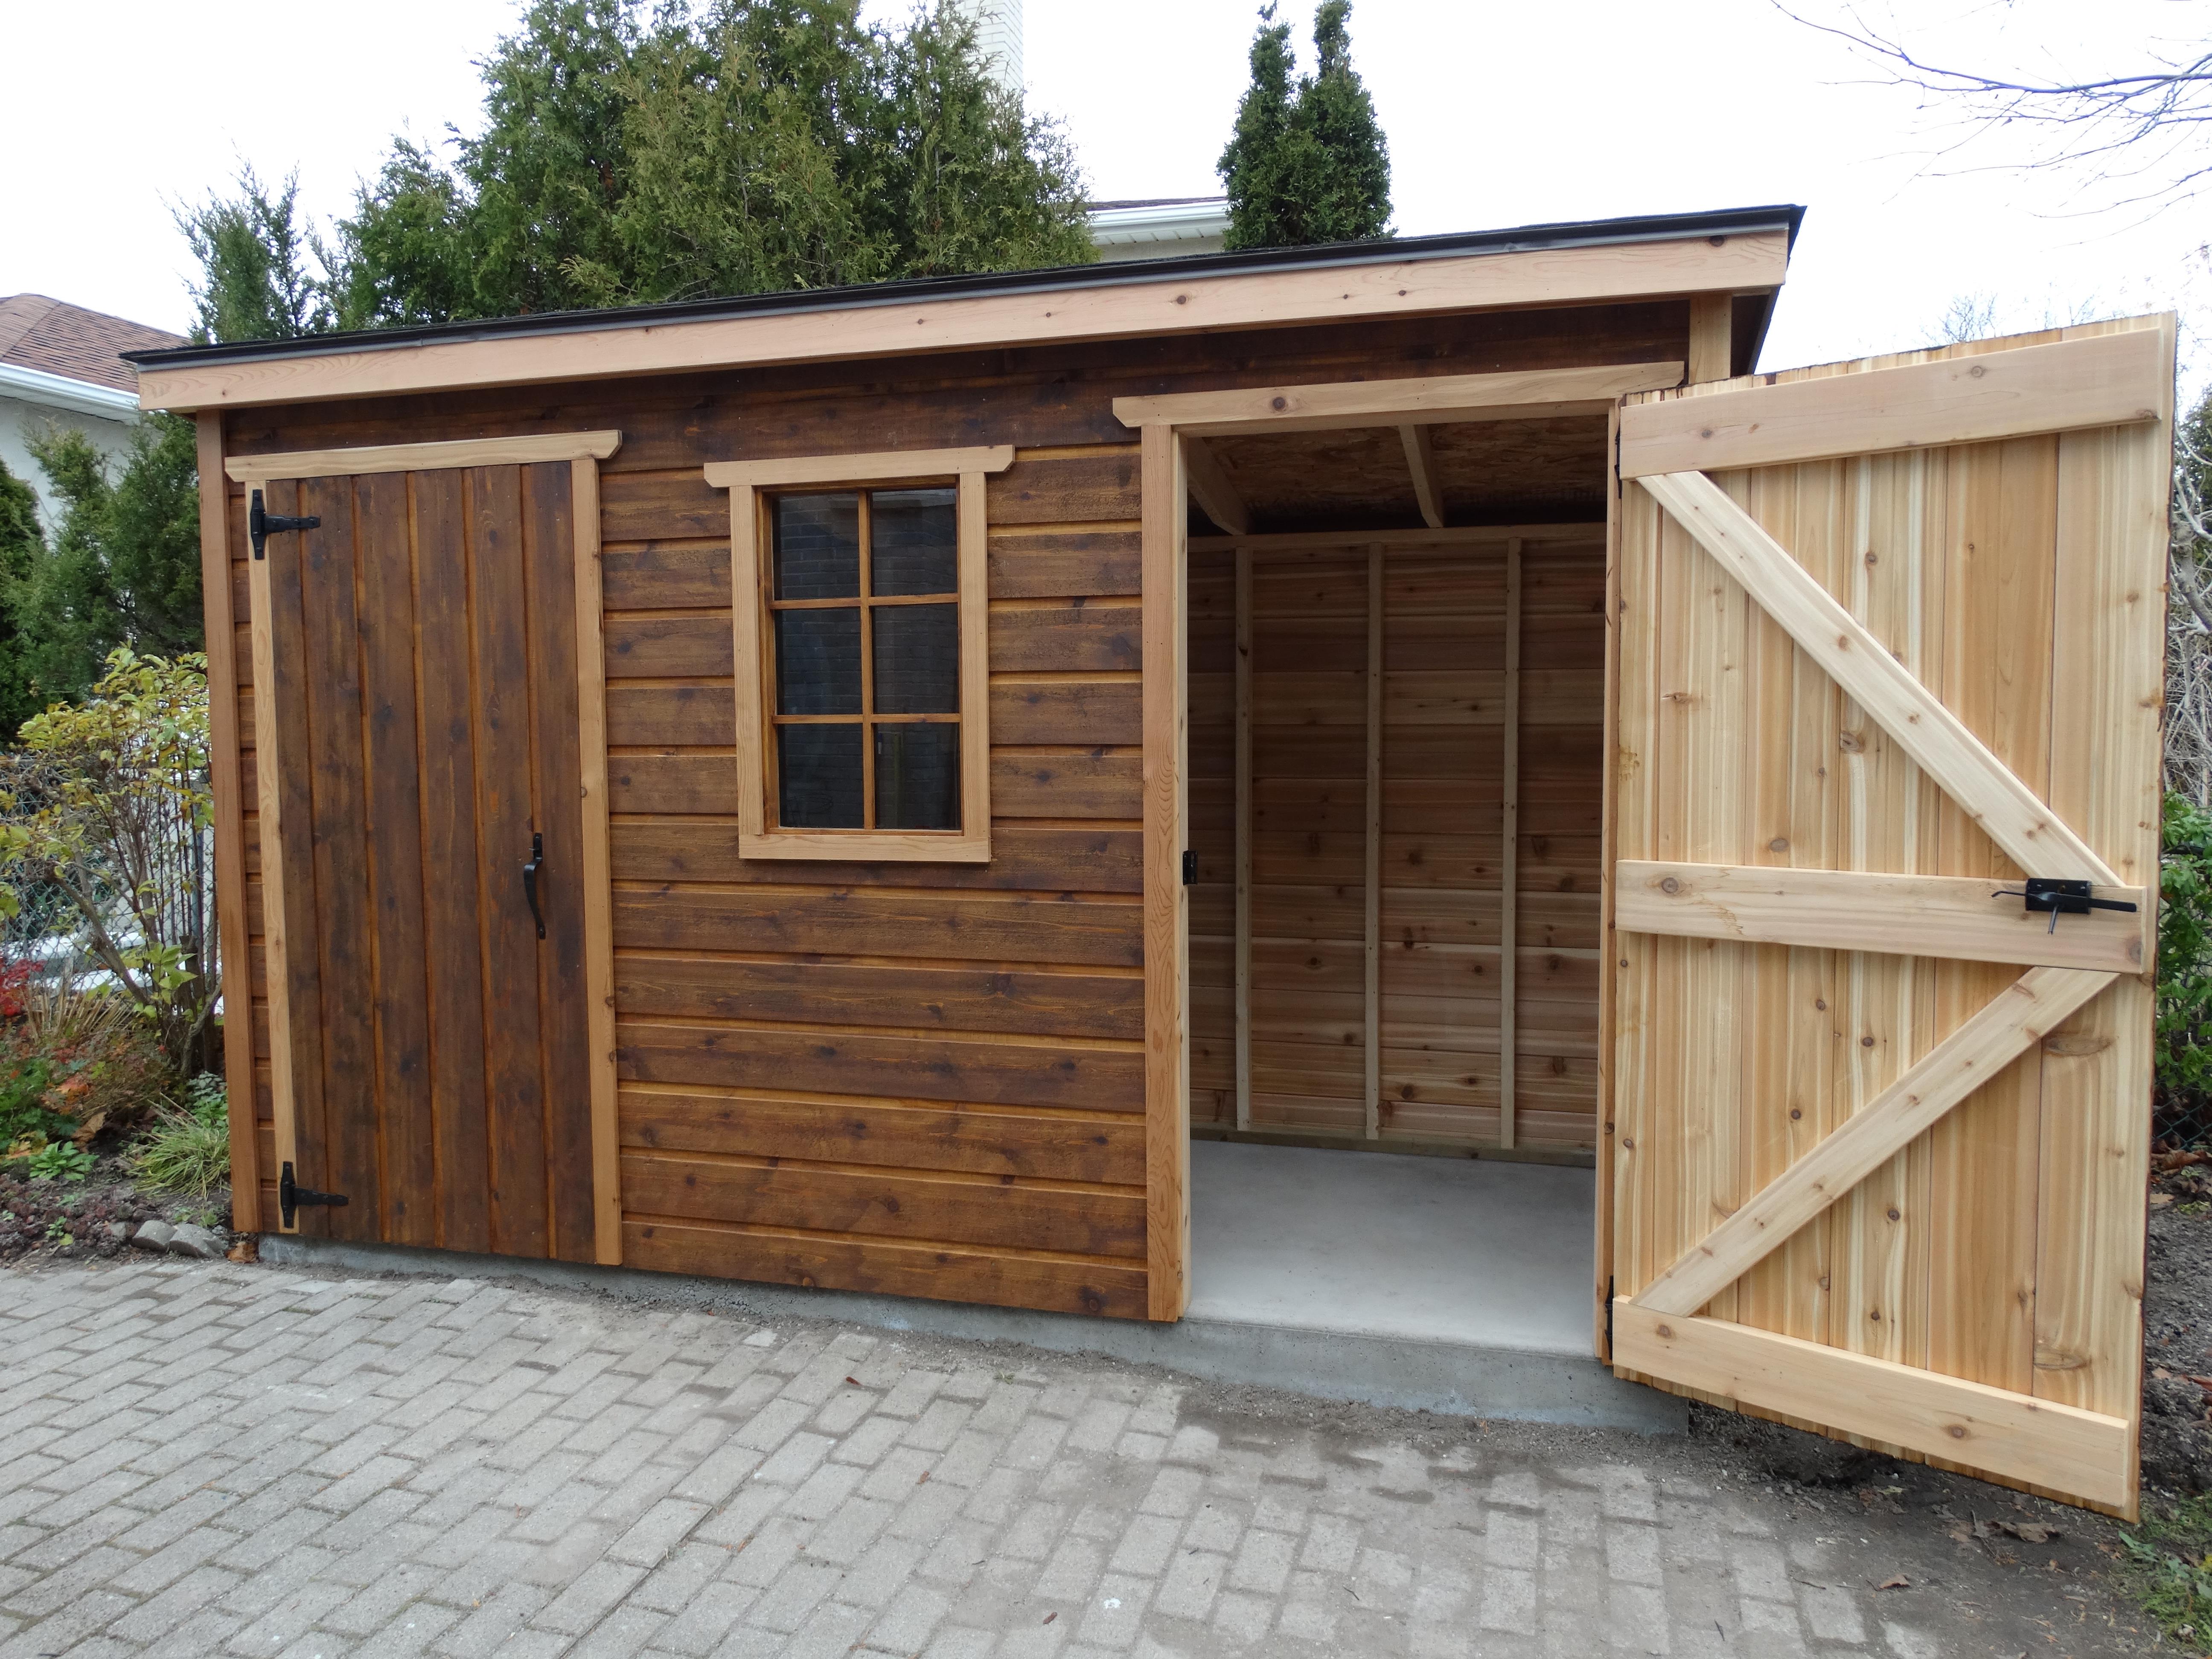 Cedar Sarawak lean to shed 5x12 with fixed window in Toronto, Ontario. ID number 195929-3